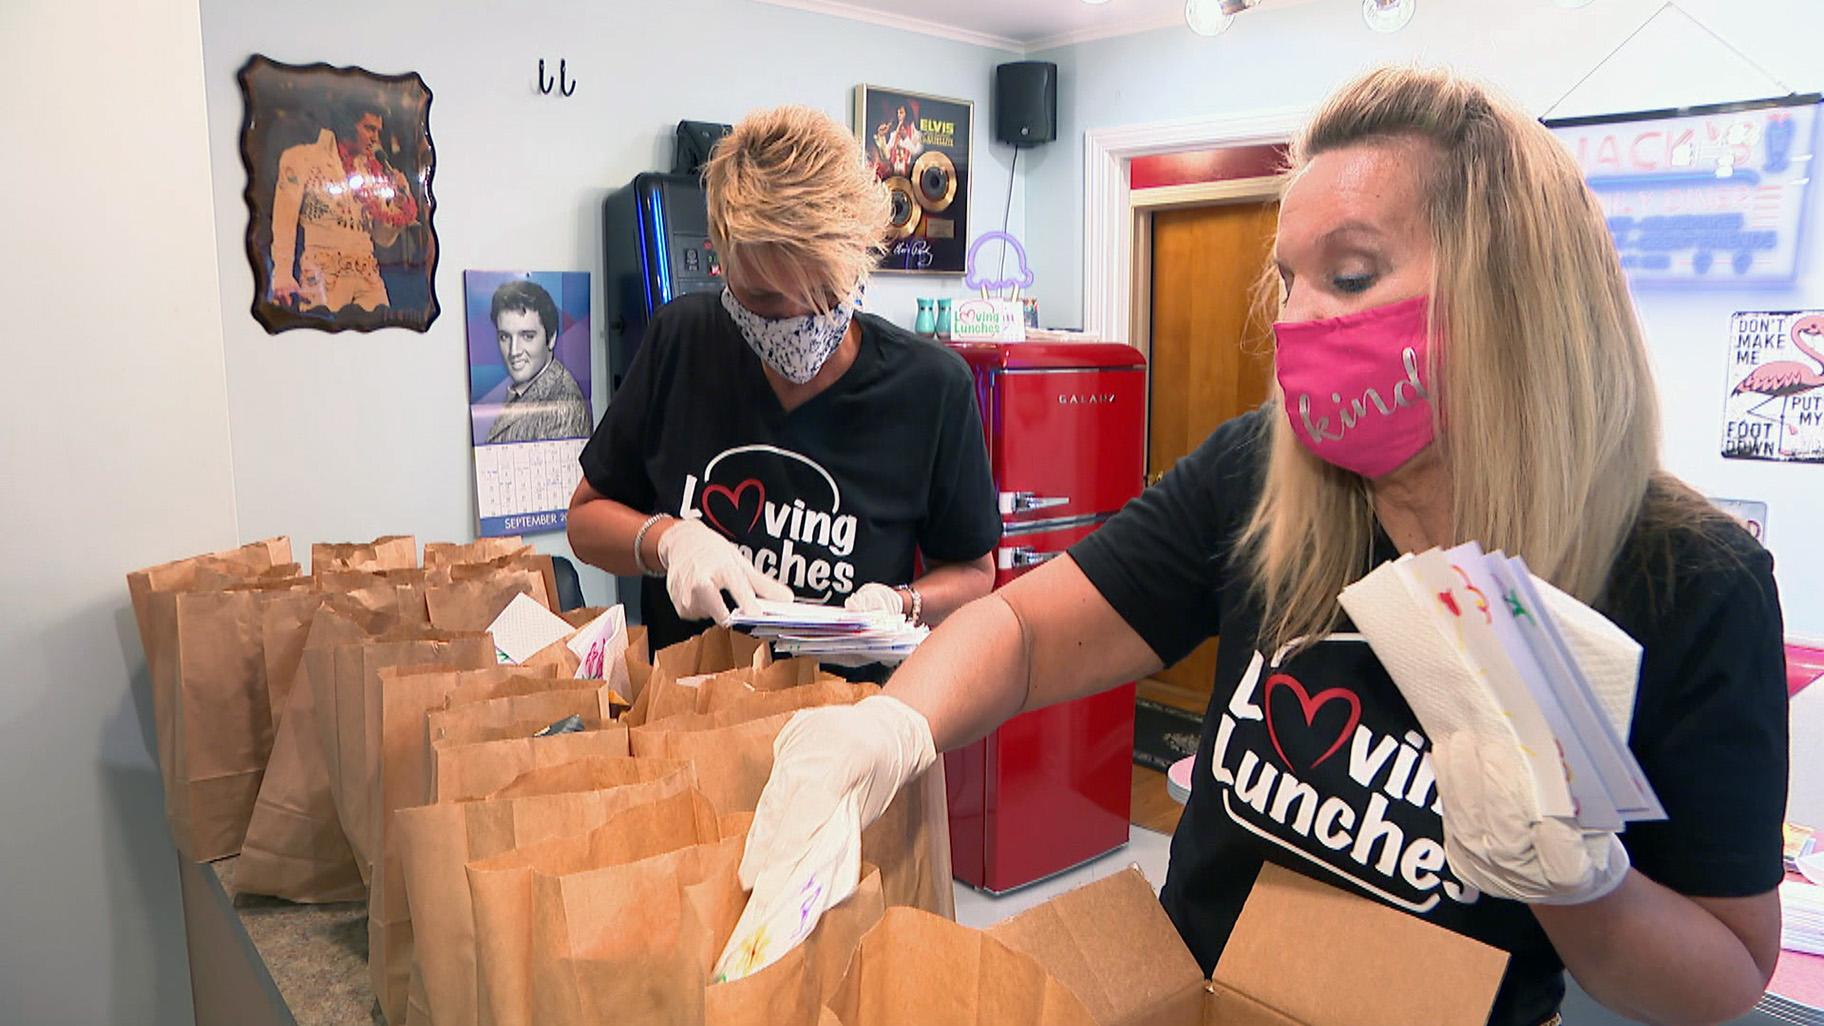 Every Sunday, Ann Marie Frank, along with family members and volunteers, packs up lunches for homeless individuals. (WTTW News)